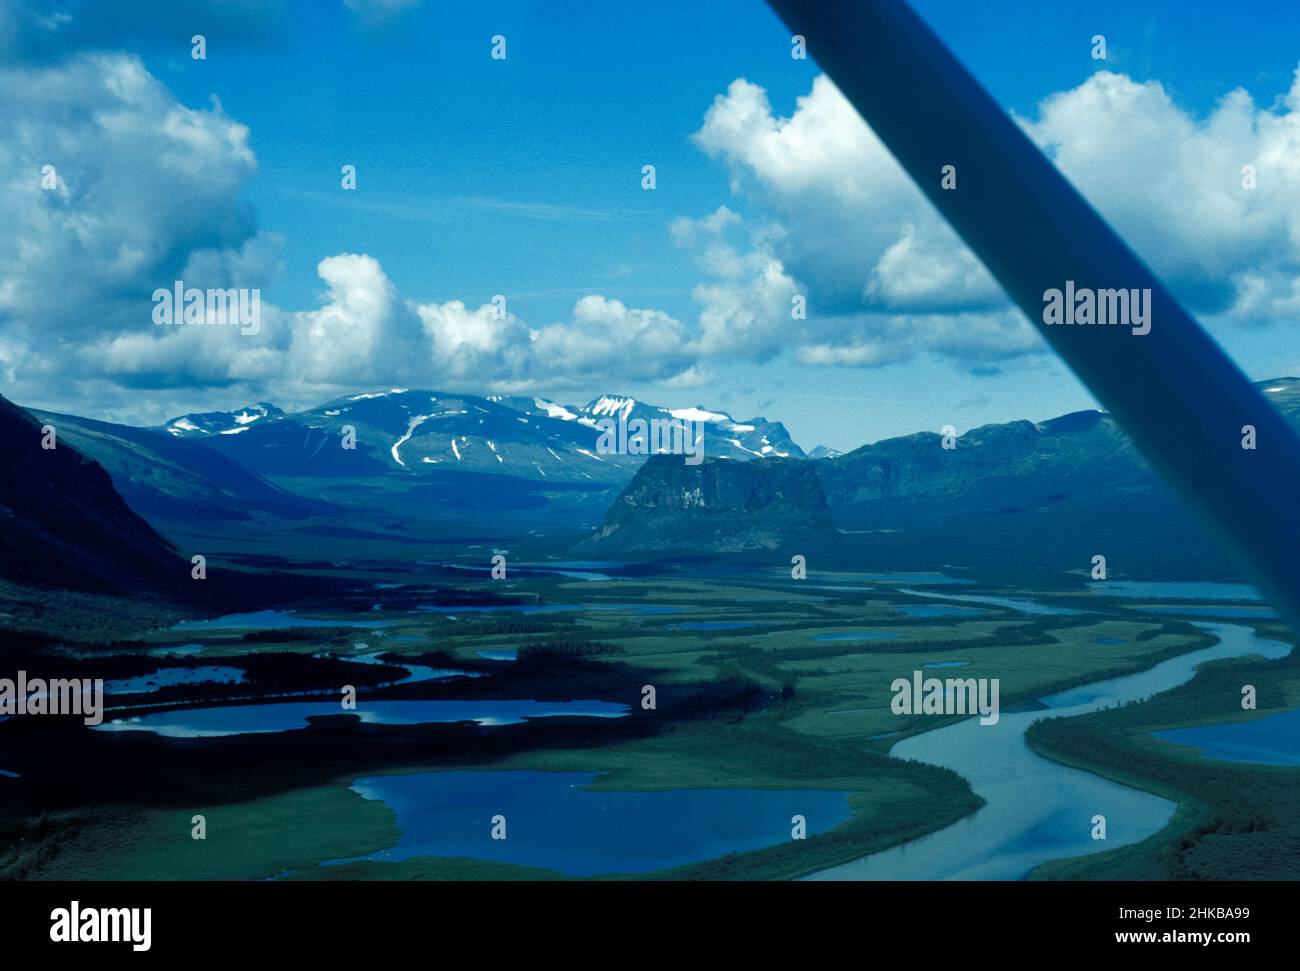 The mountain Nammàsj from a airplane 1979, analog. Rapavalley in Sarek National Park straight ahead. Stock Photo